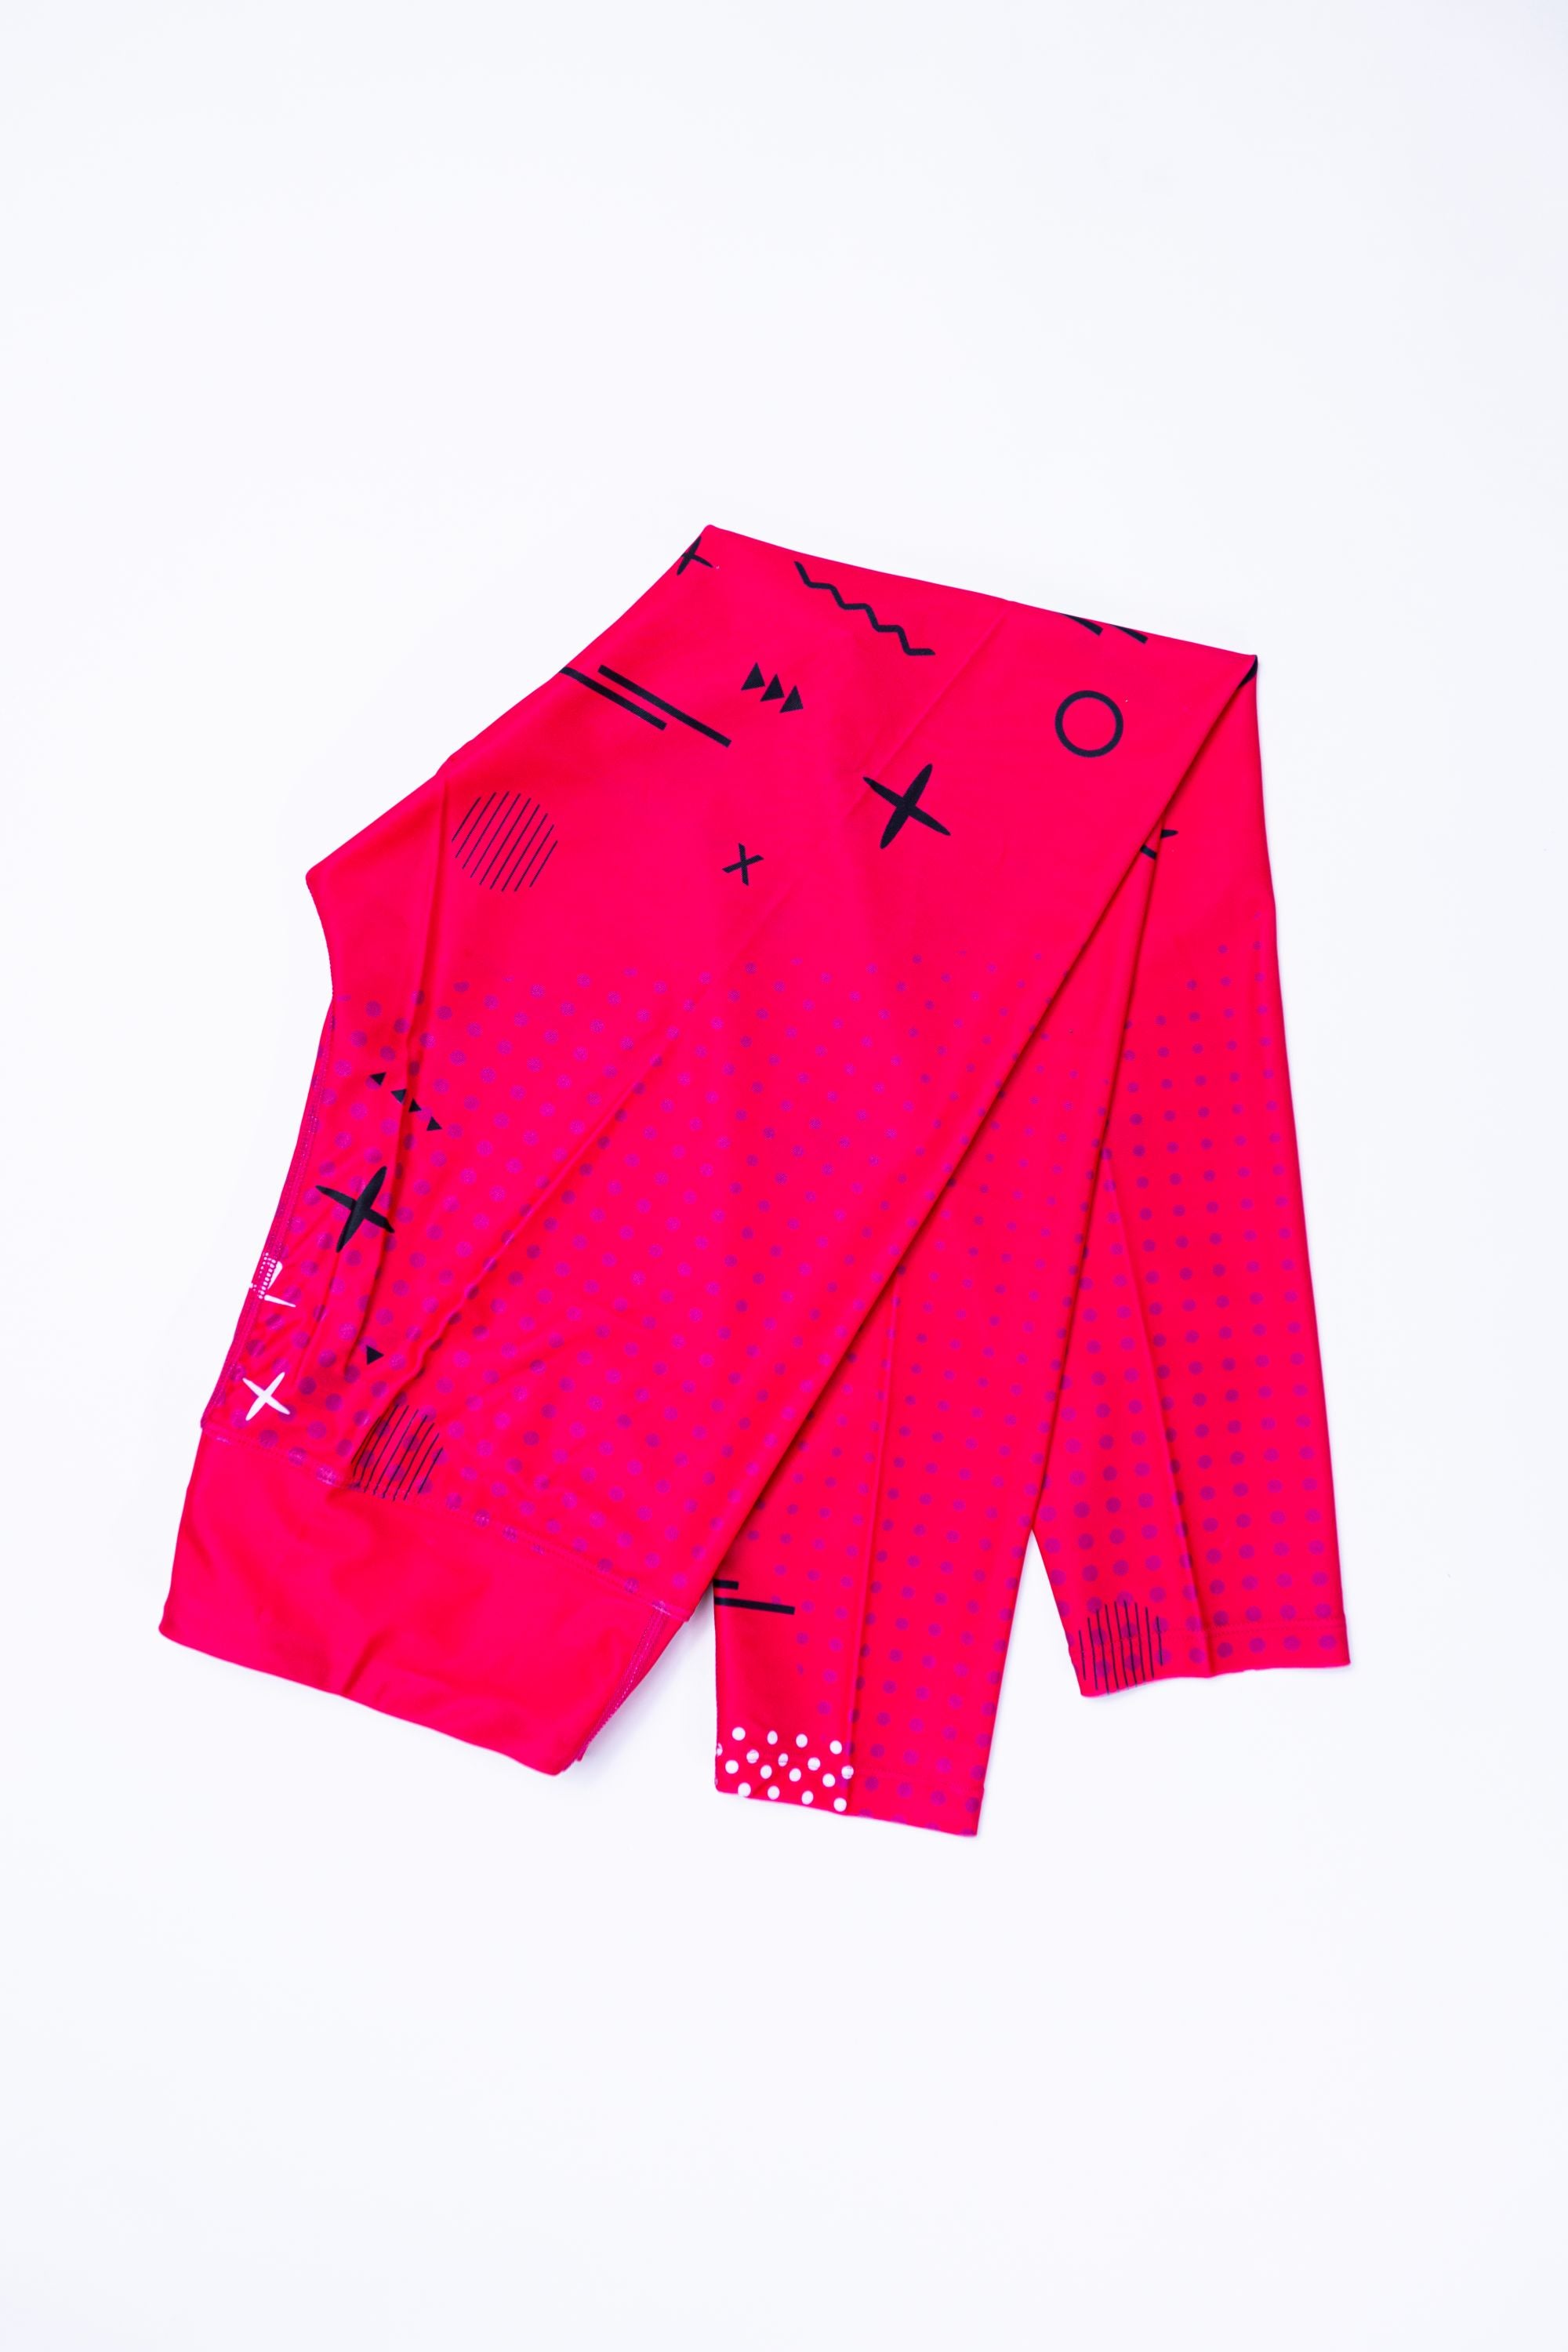 WOMEN LEGGING  PINK AND BLACK COLOUR SUBLIMATED